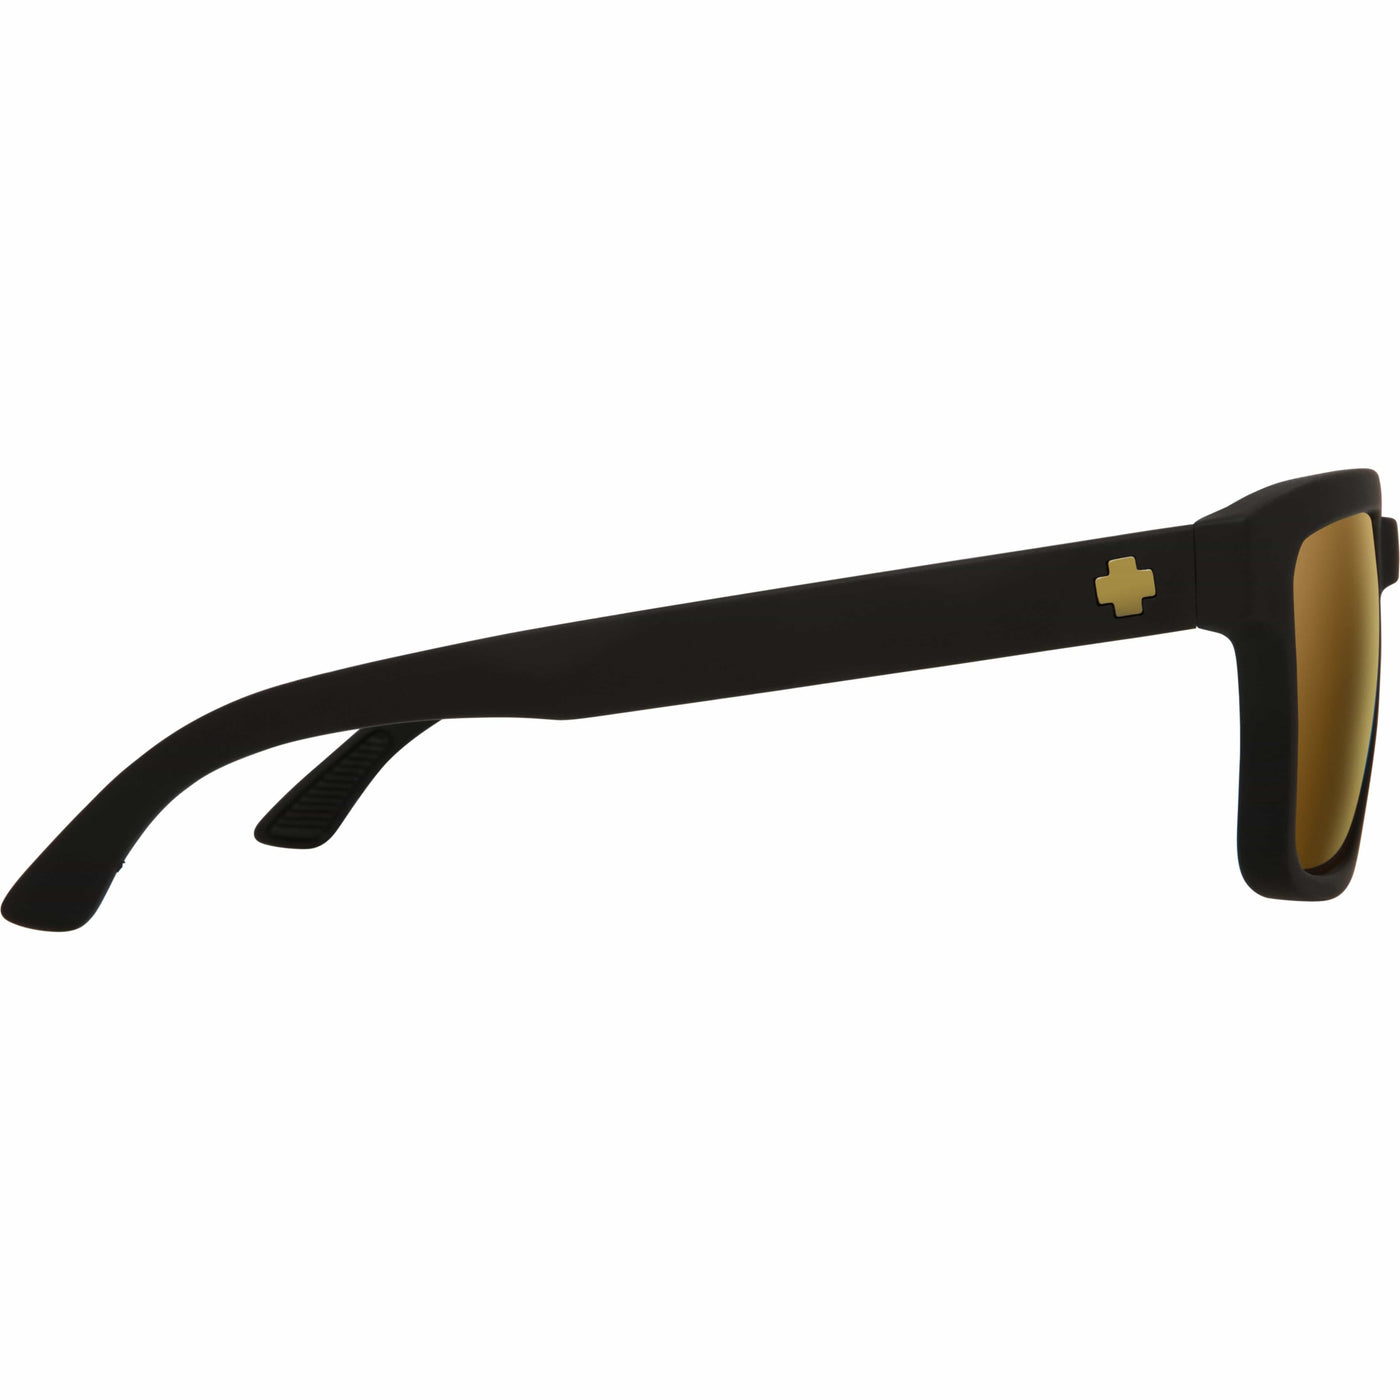 SPY HELM 2 Sunglasses, Happy Lens - Gold 8Lines Shop - Fast Shipping